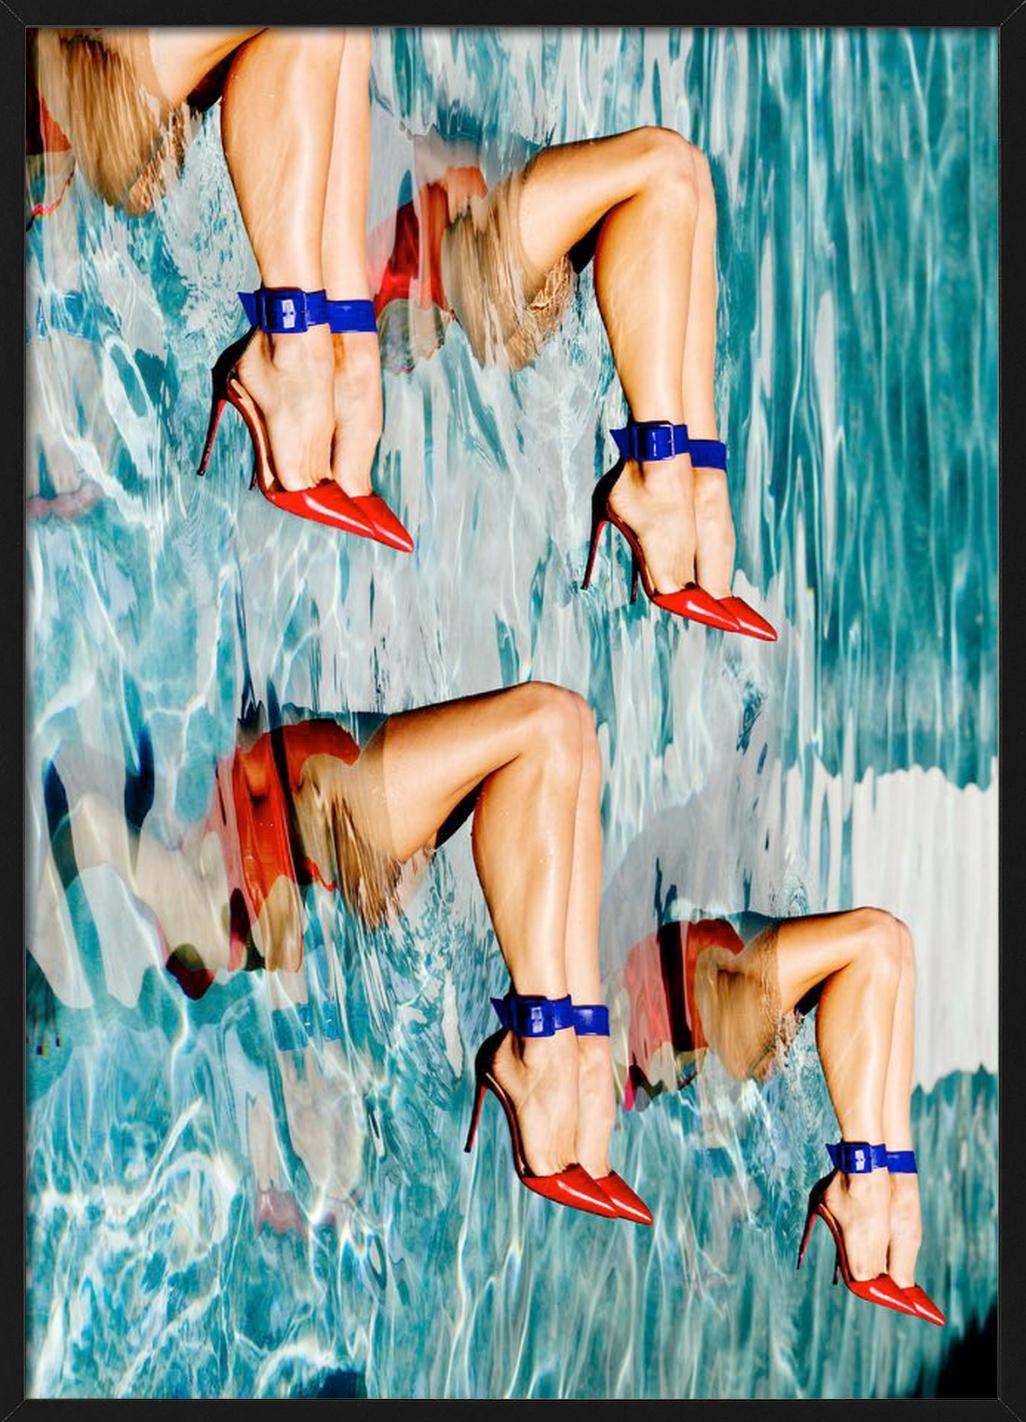 Footwork - legs in red heels in a blue swimmingpool, fine art photography, 2017 - Gray Color Photograph by Tony Kelly